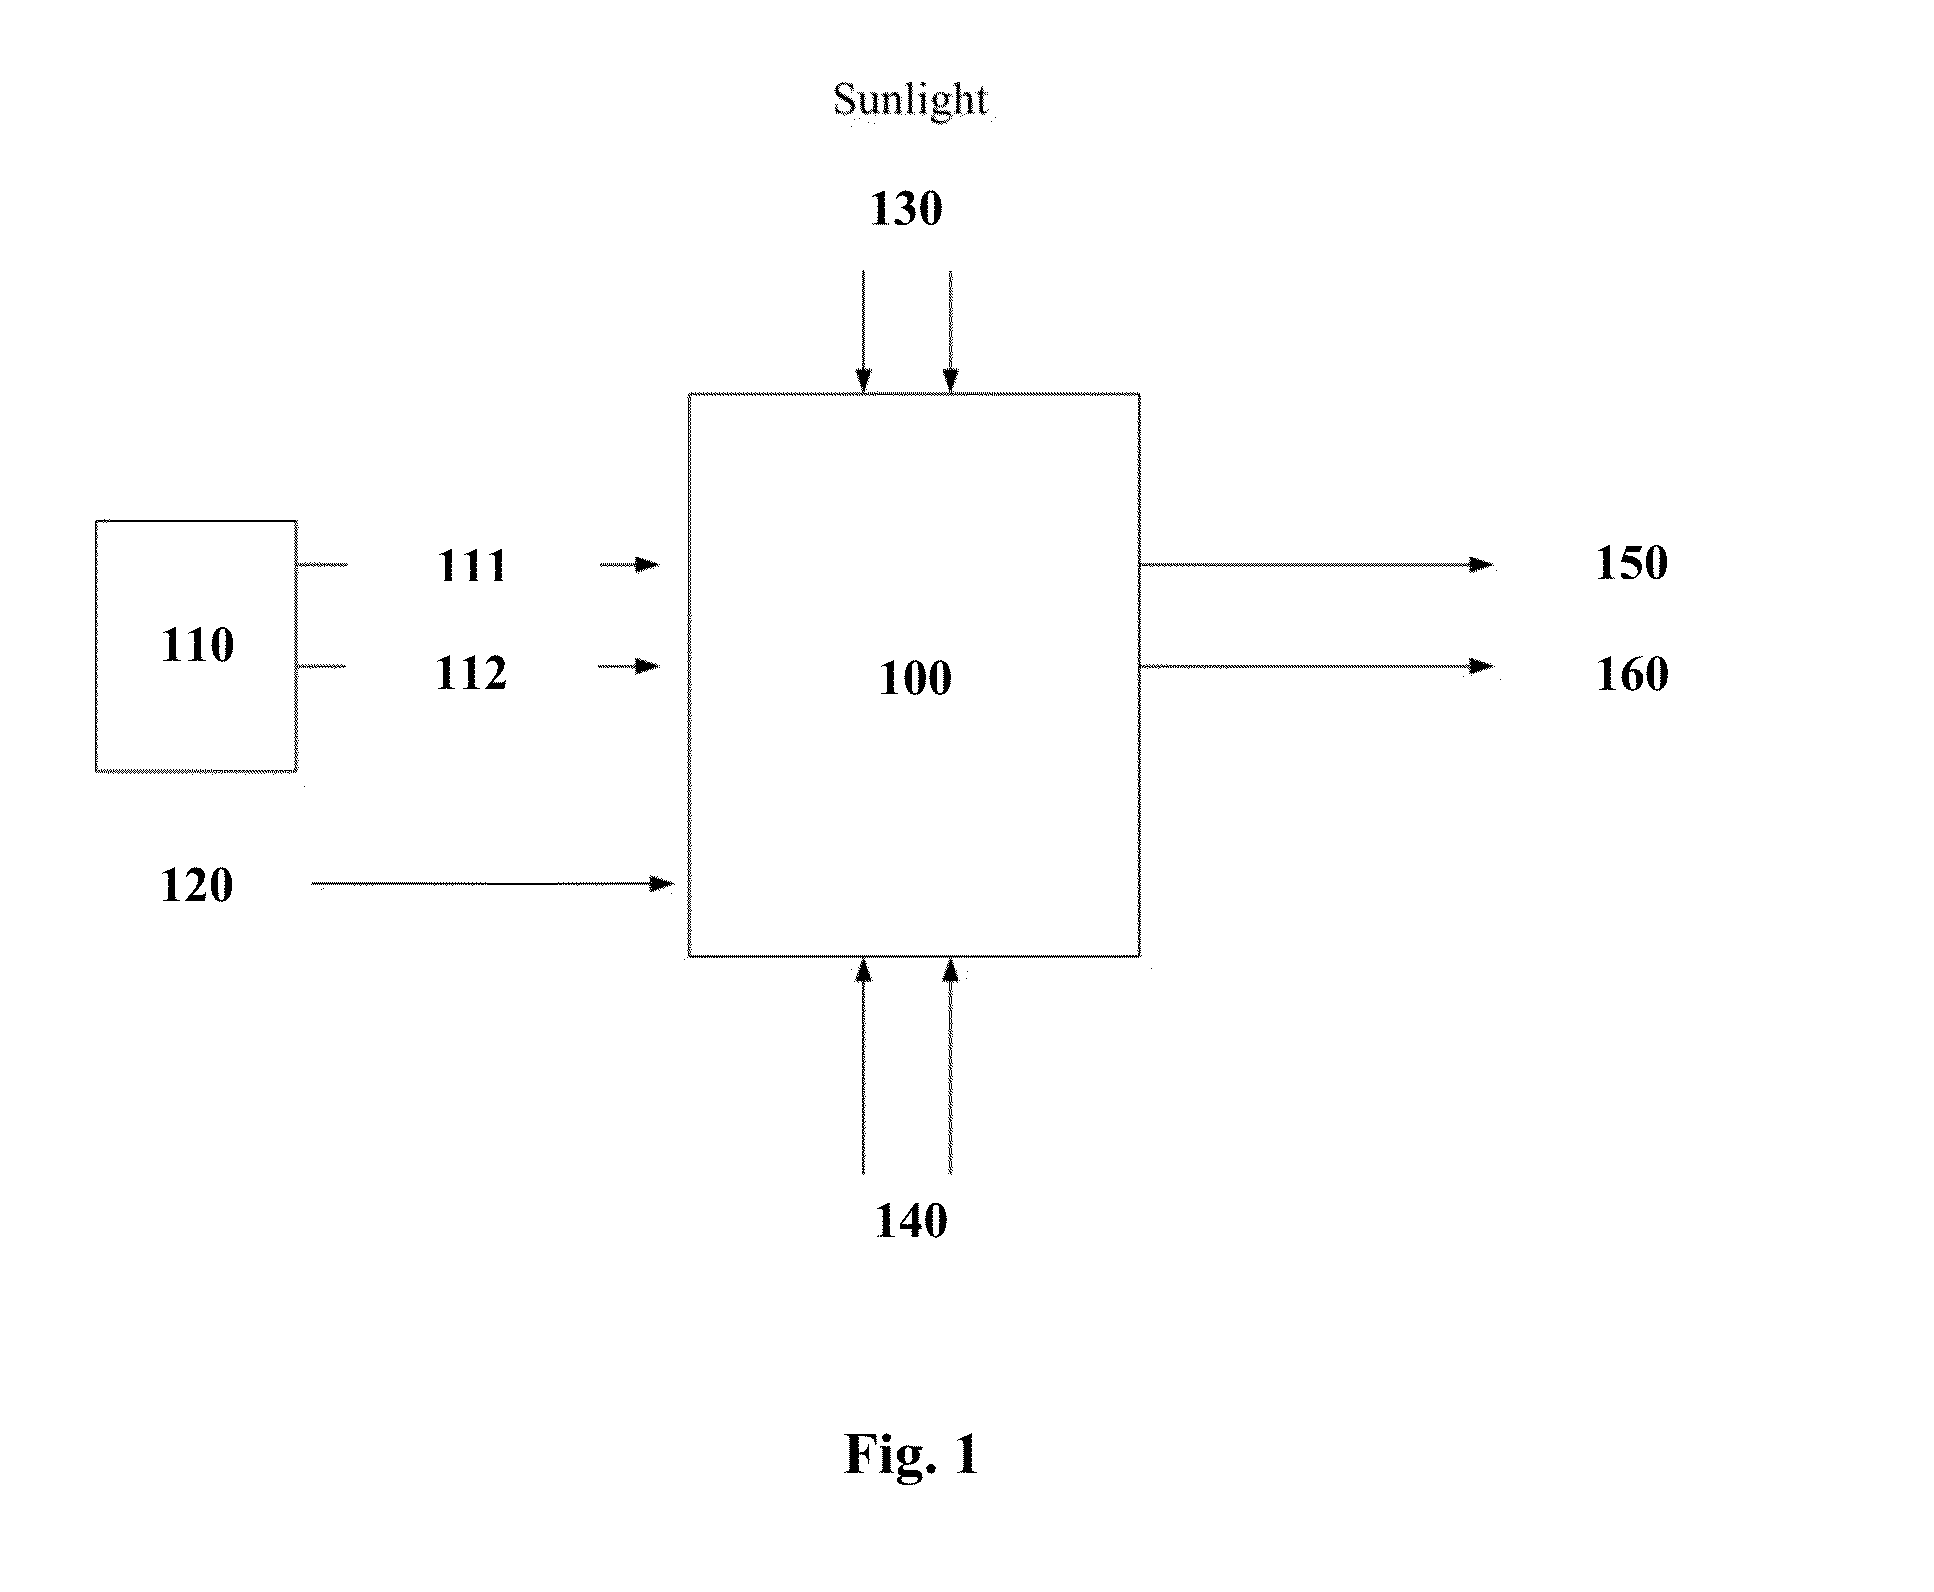 Multistory Bioreaction System for Enhancing Photosynthesis